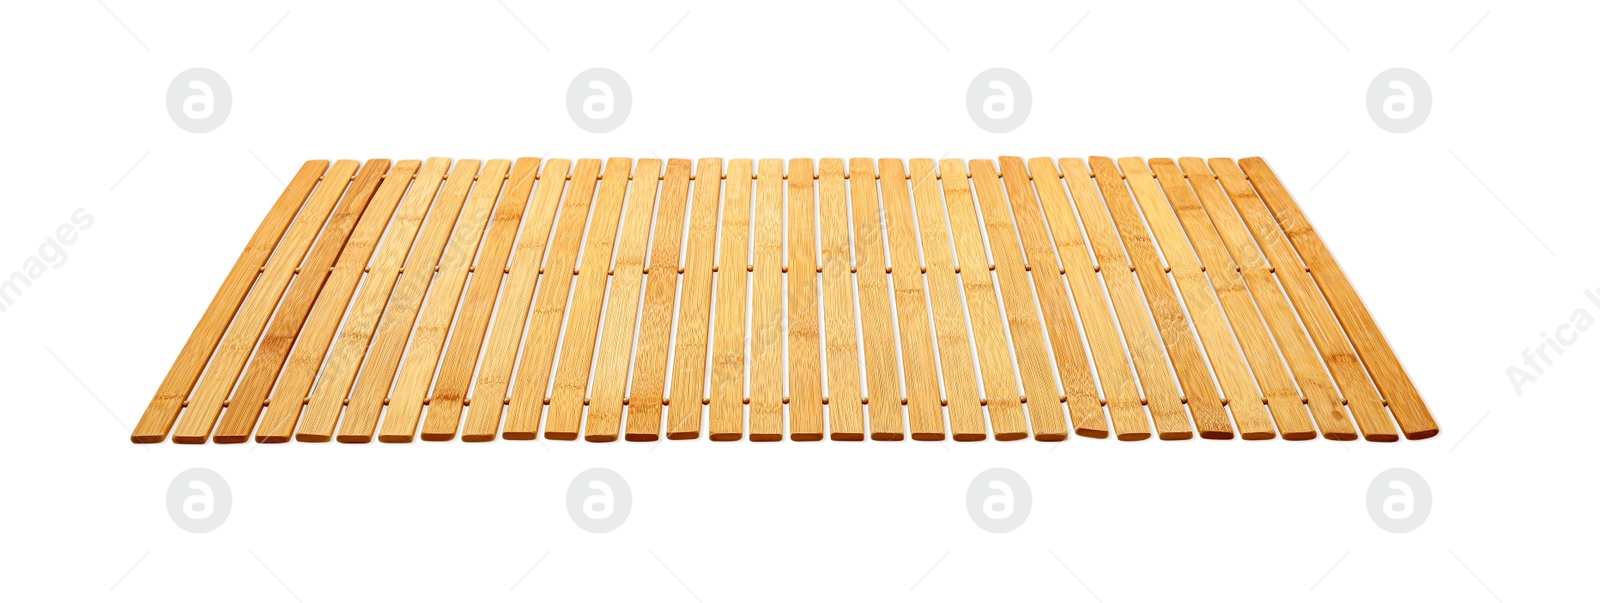 Photo of Wooden bath mat isolated on white. Floor covering